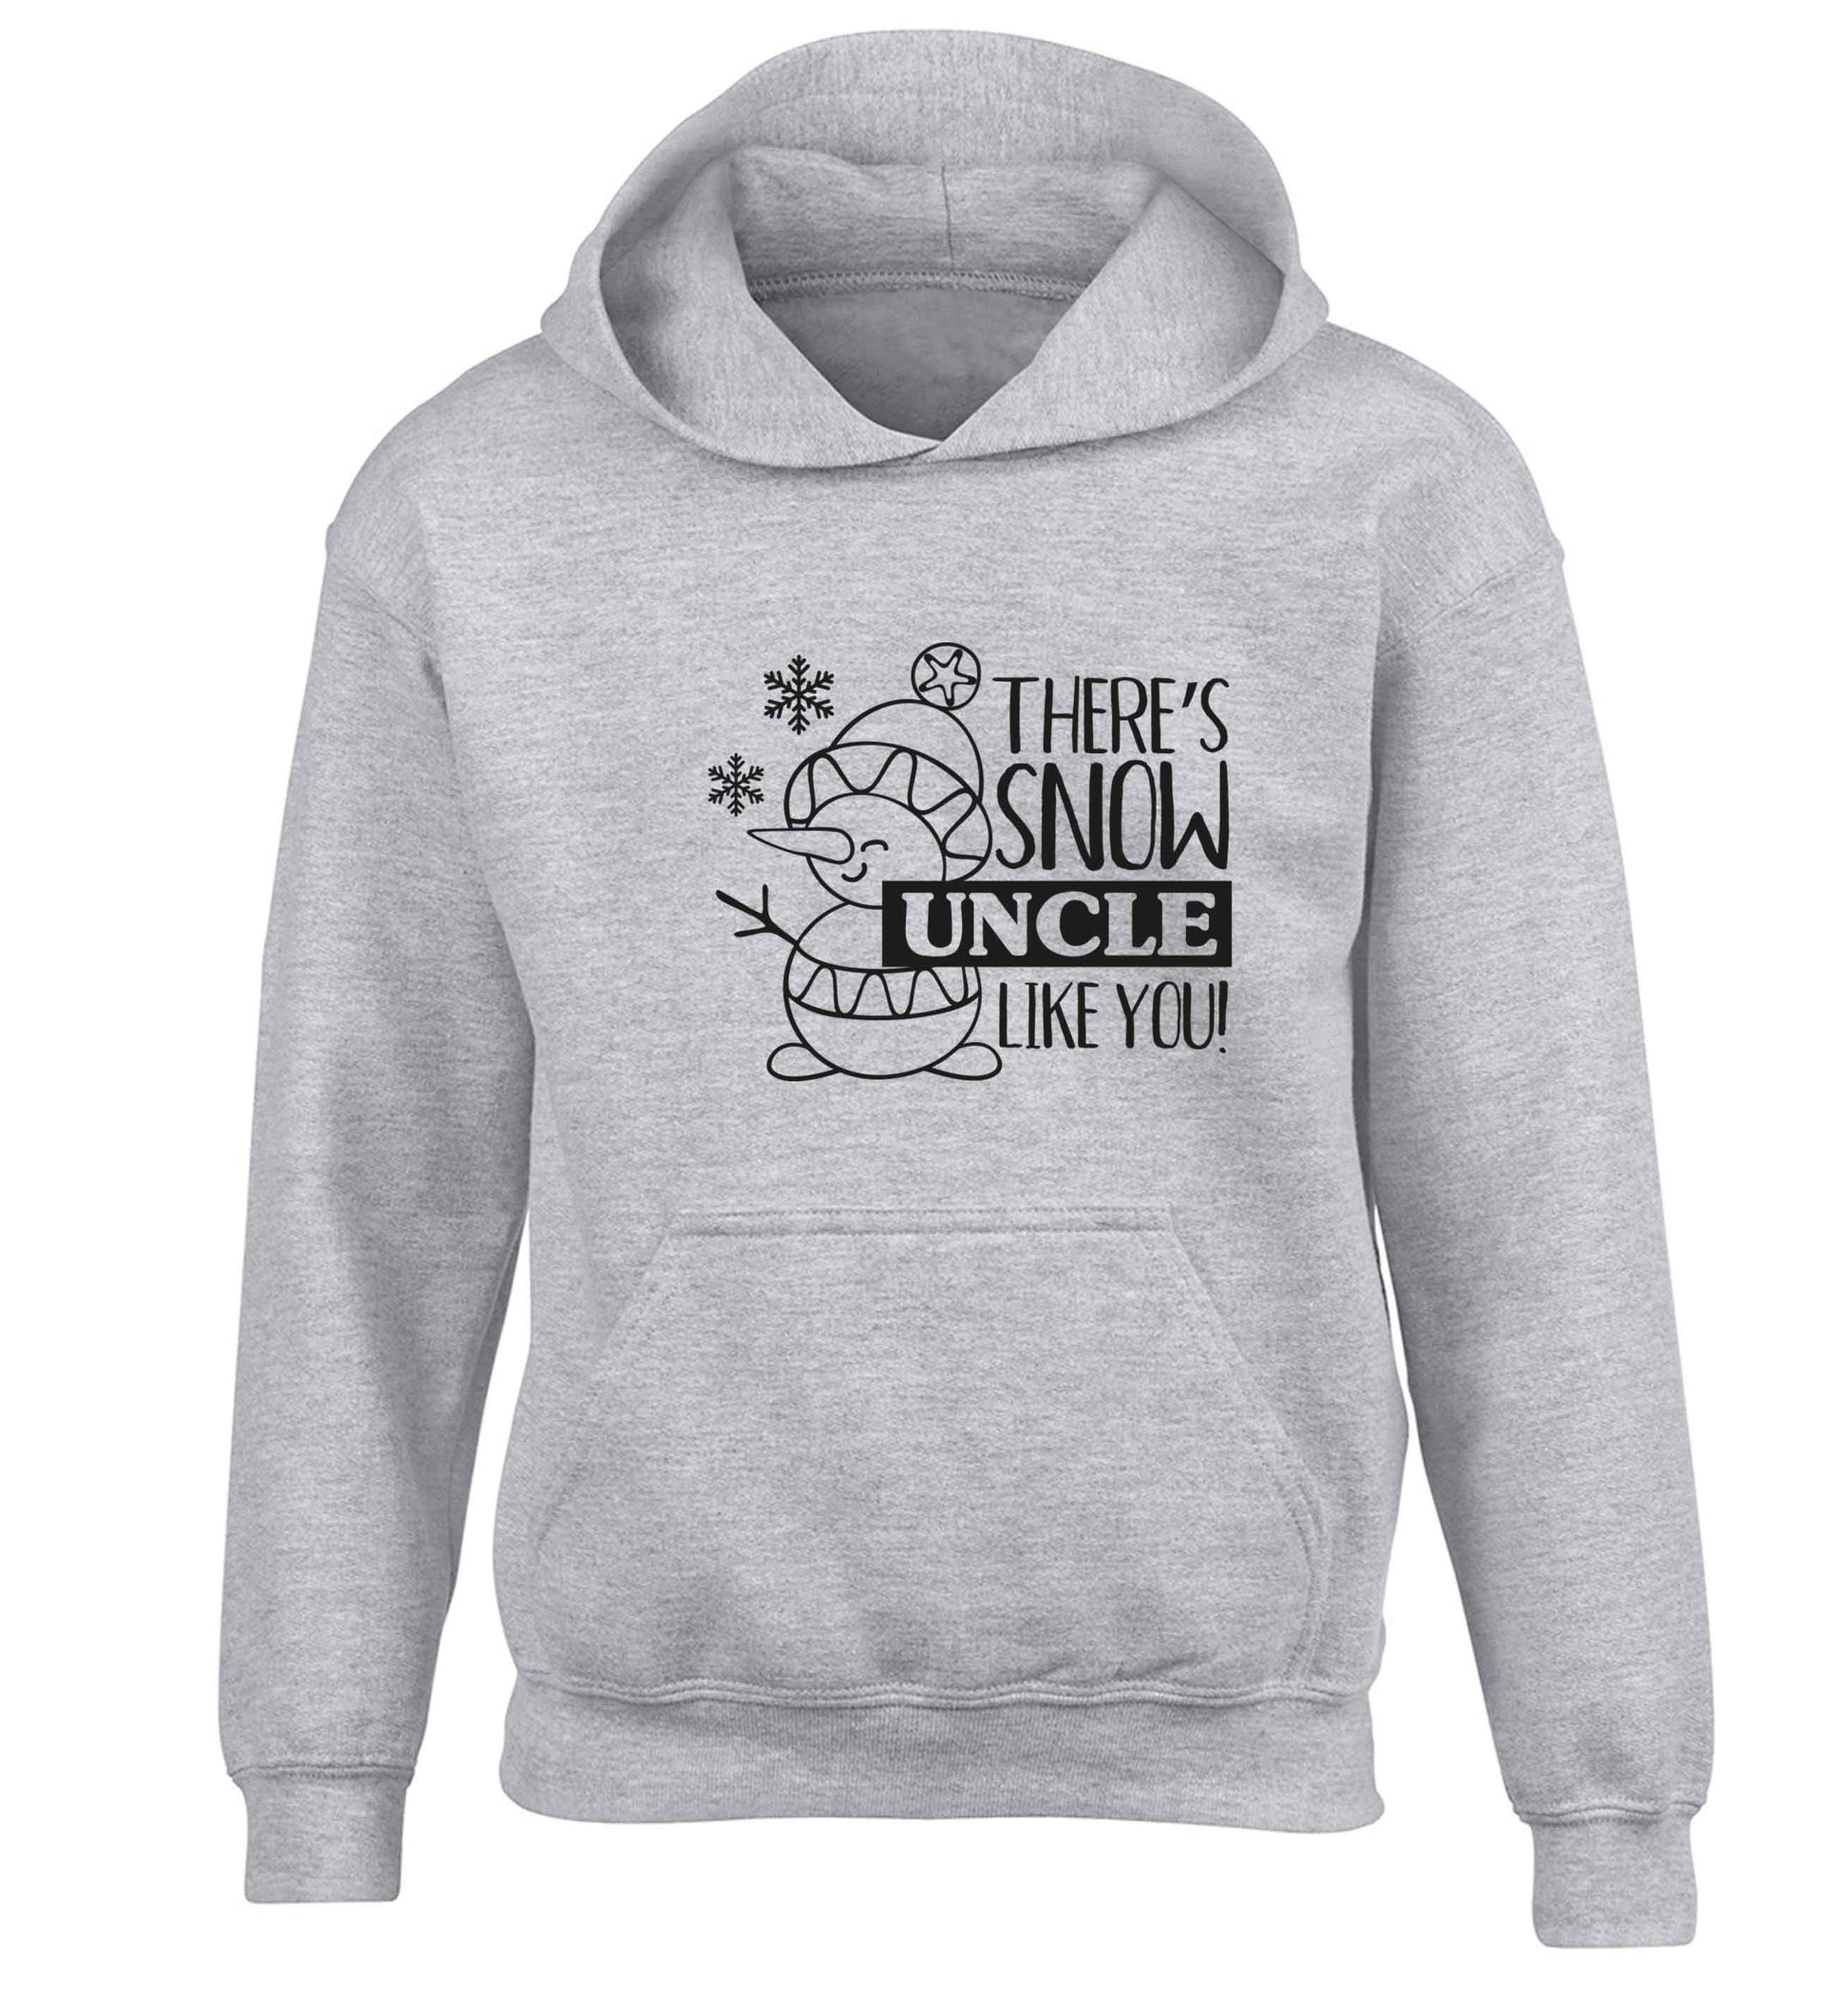 There's snow uncle like you children's grey hoodie 12-13 Years